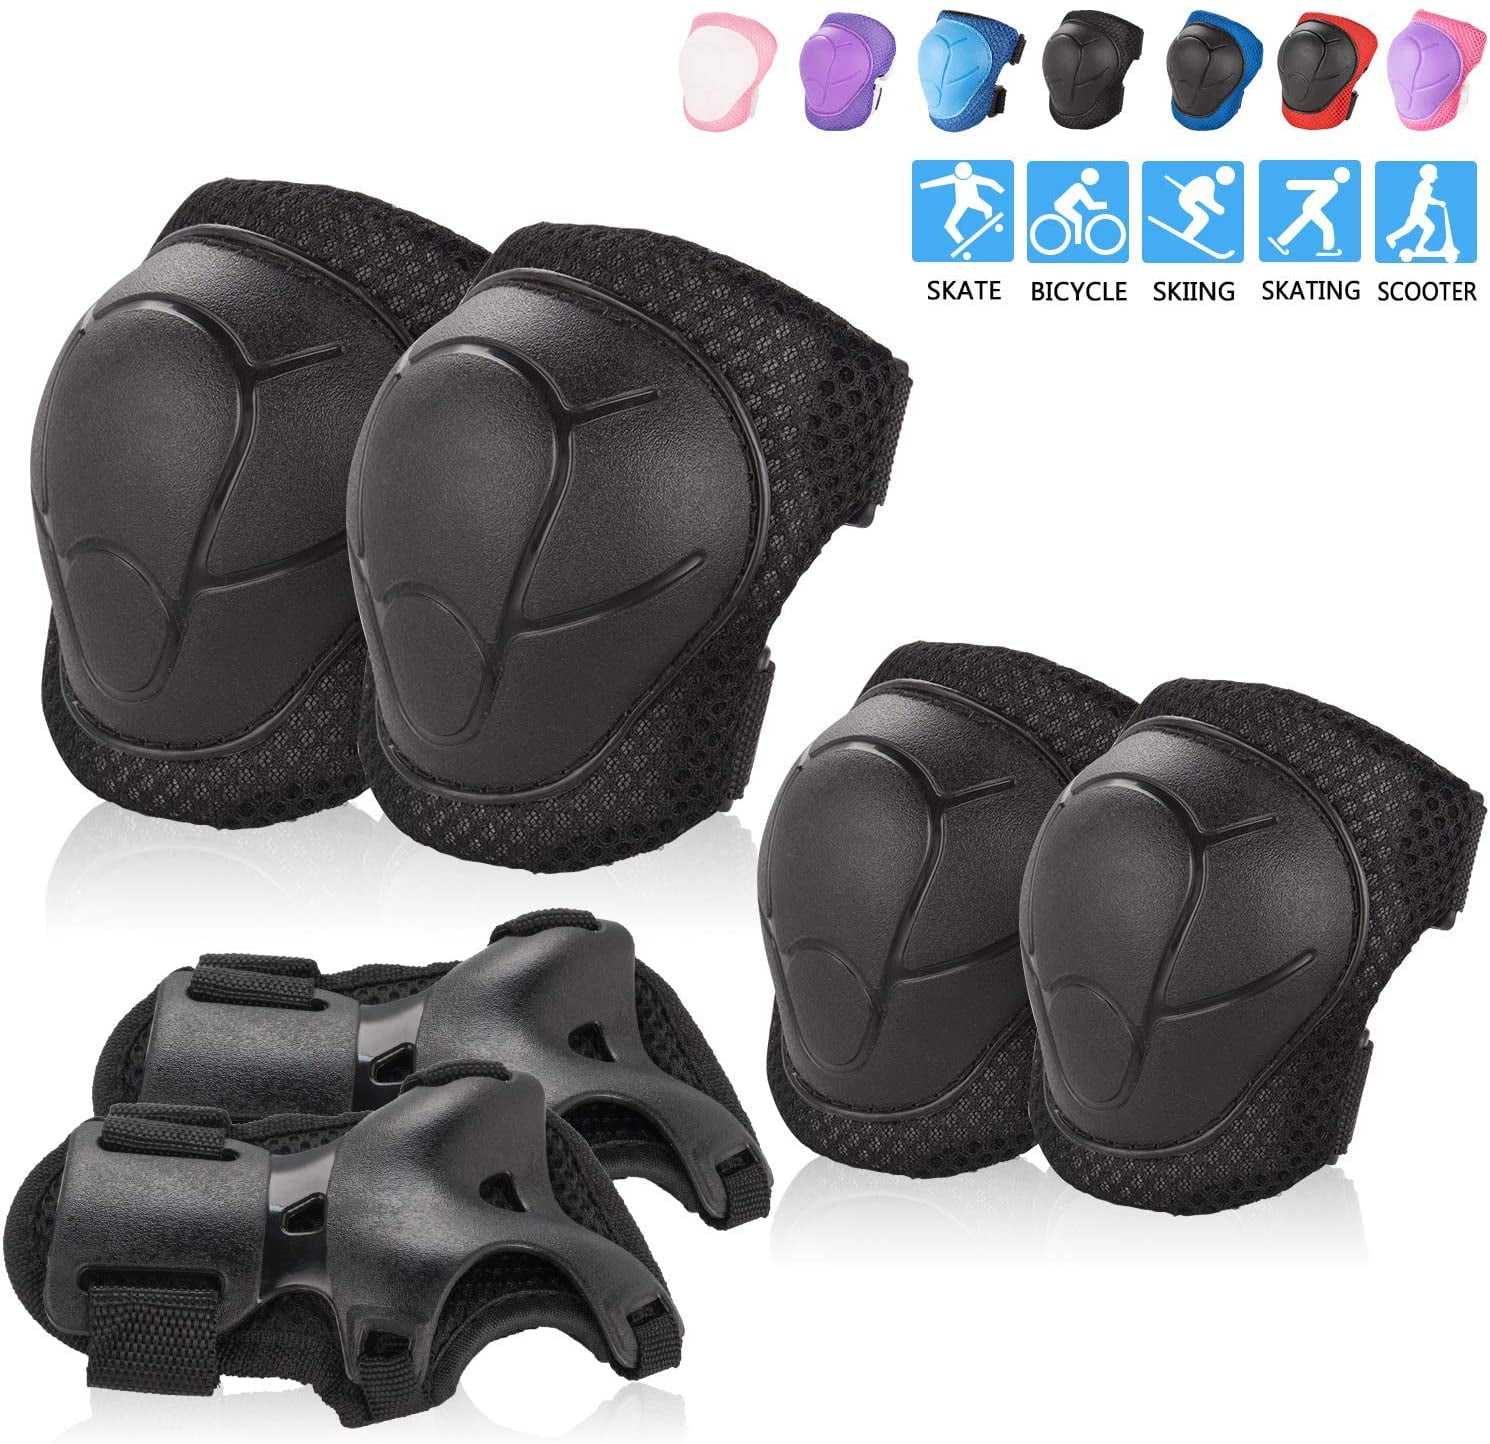 Knee Protector Pads for Kids Kneepads and Elbow Pads Sports Protective Gear Sets 